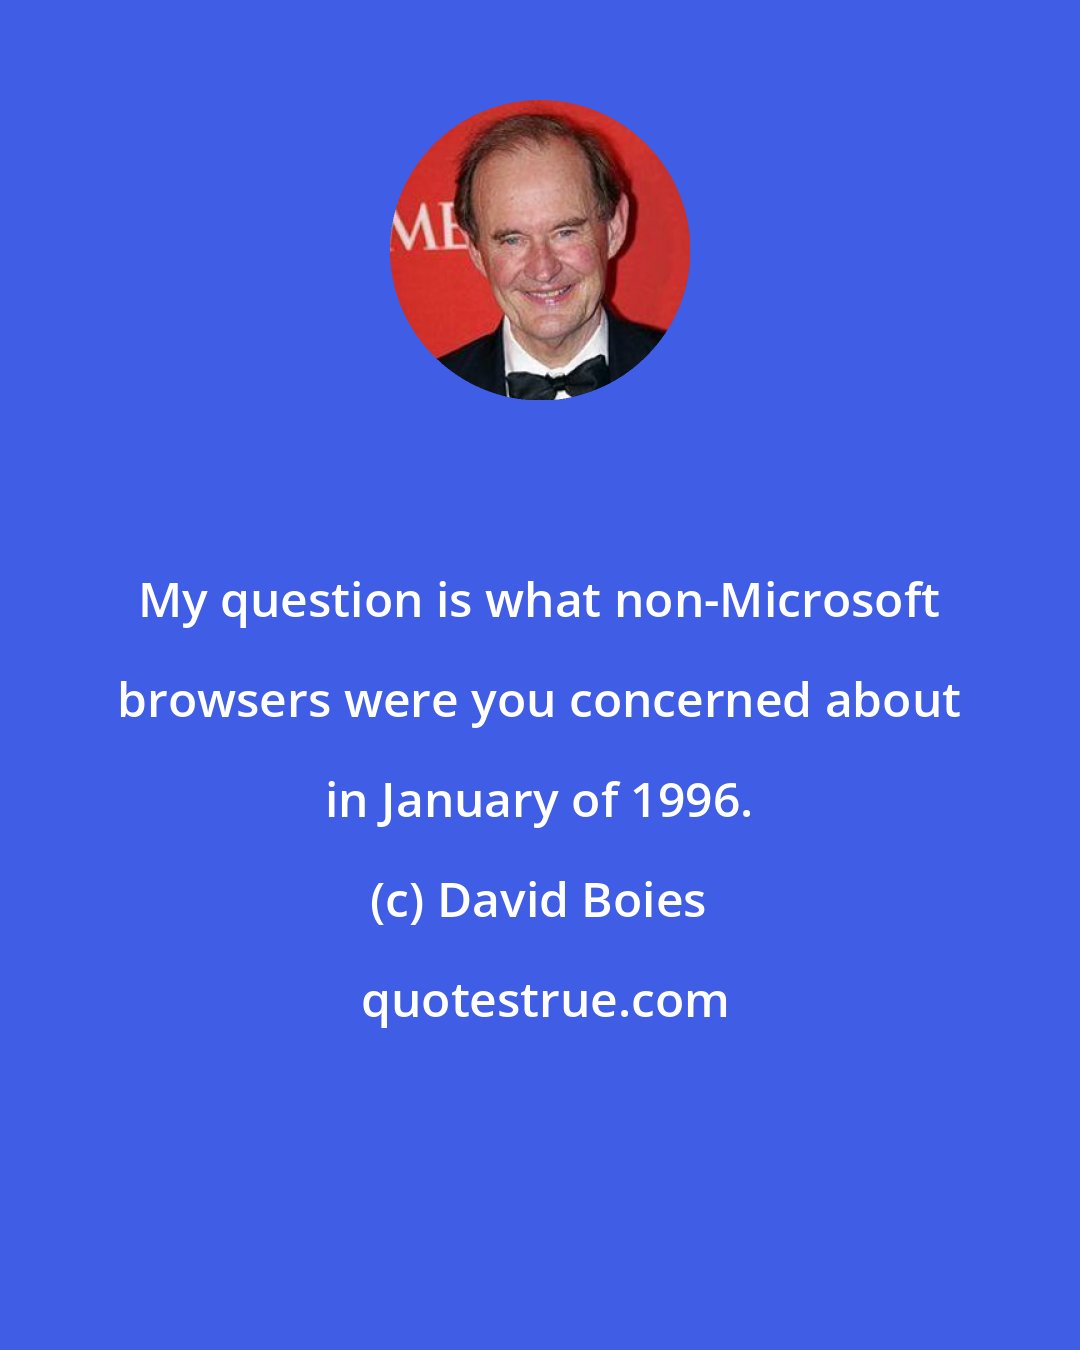 David Boies: My question is what non-Microsoft browsers were you concerned about in January of 1996.